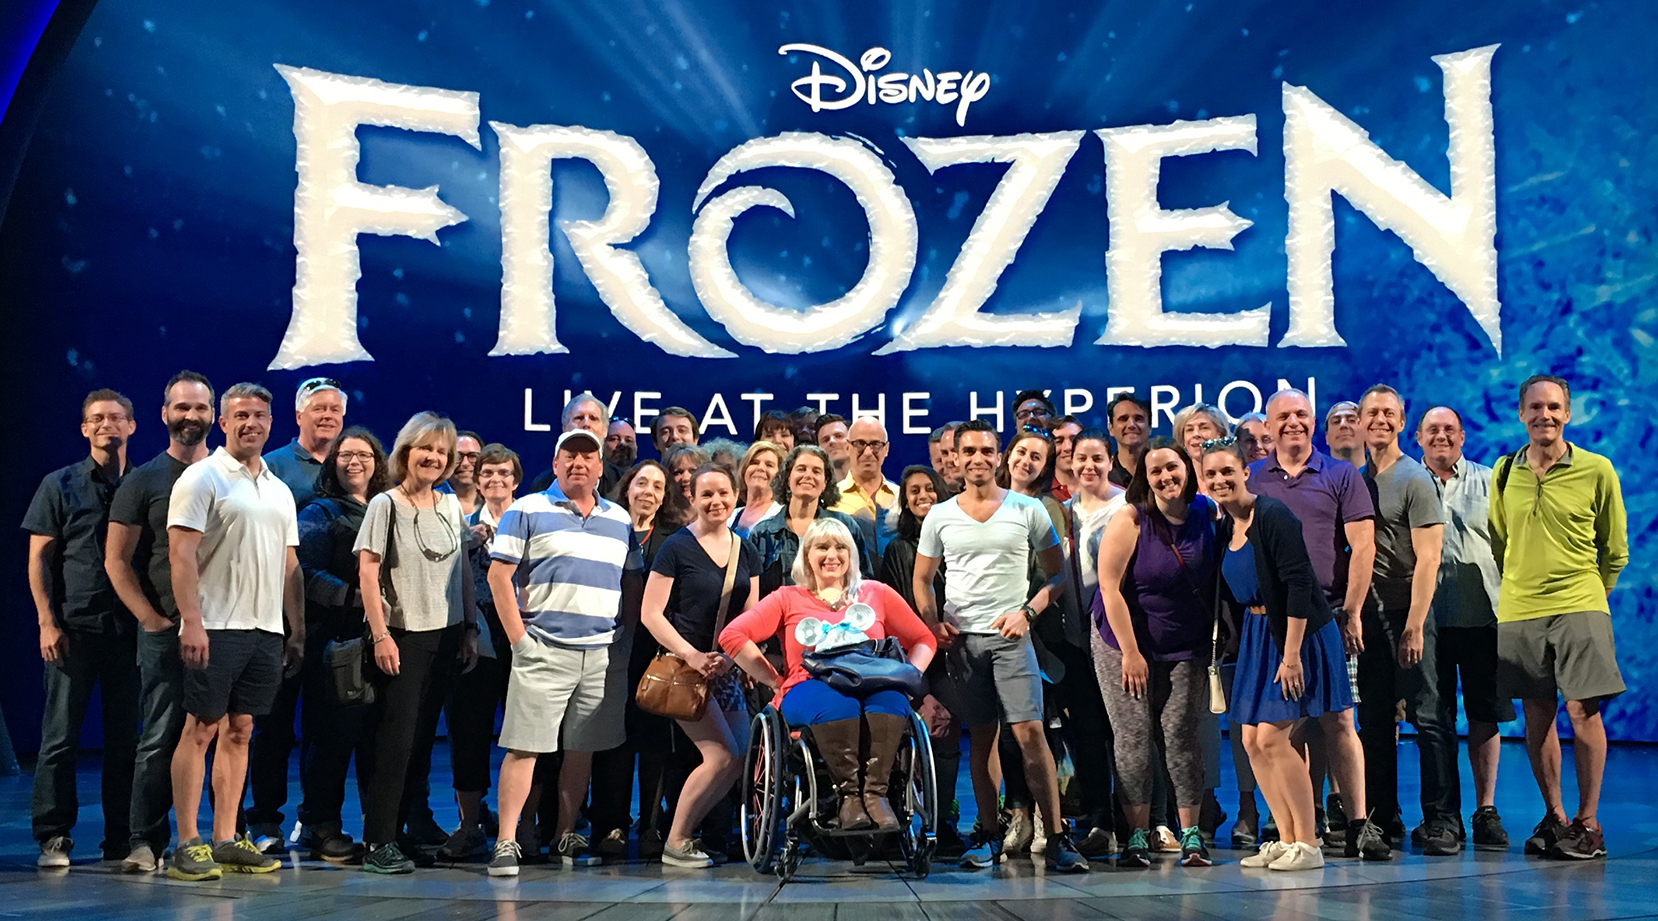 Our group after seeing the new live stage musical Frozen with a panel discussion by the creative and producing team and a backstage tour.